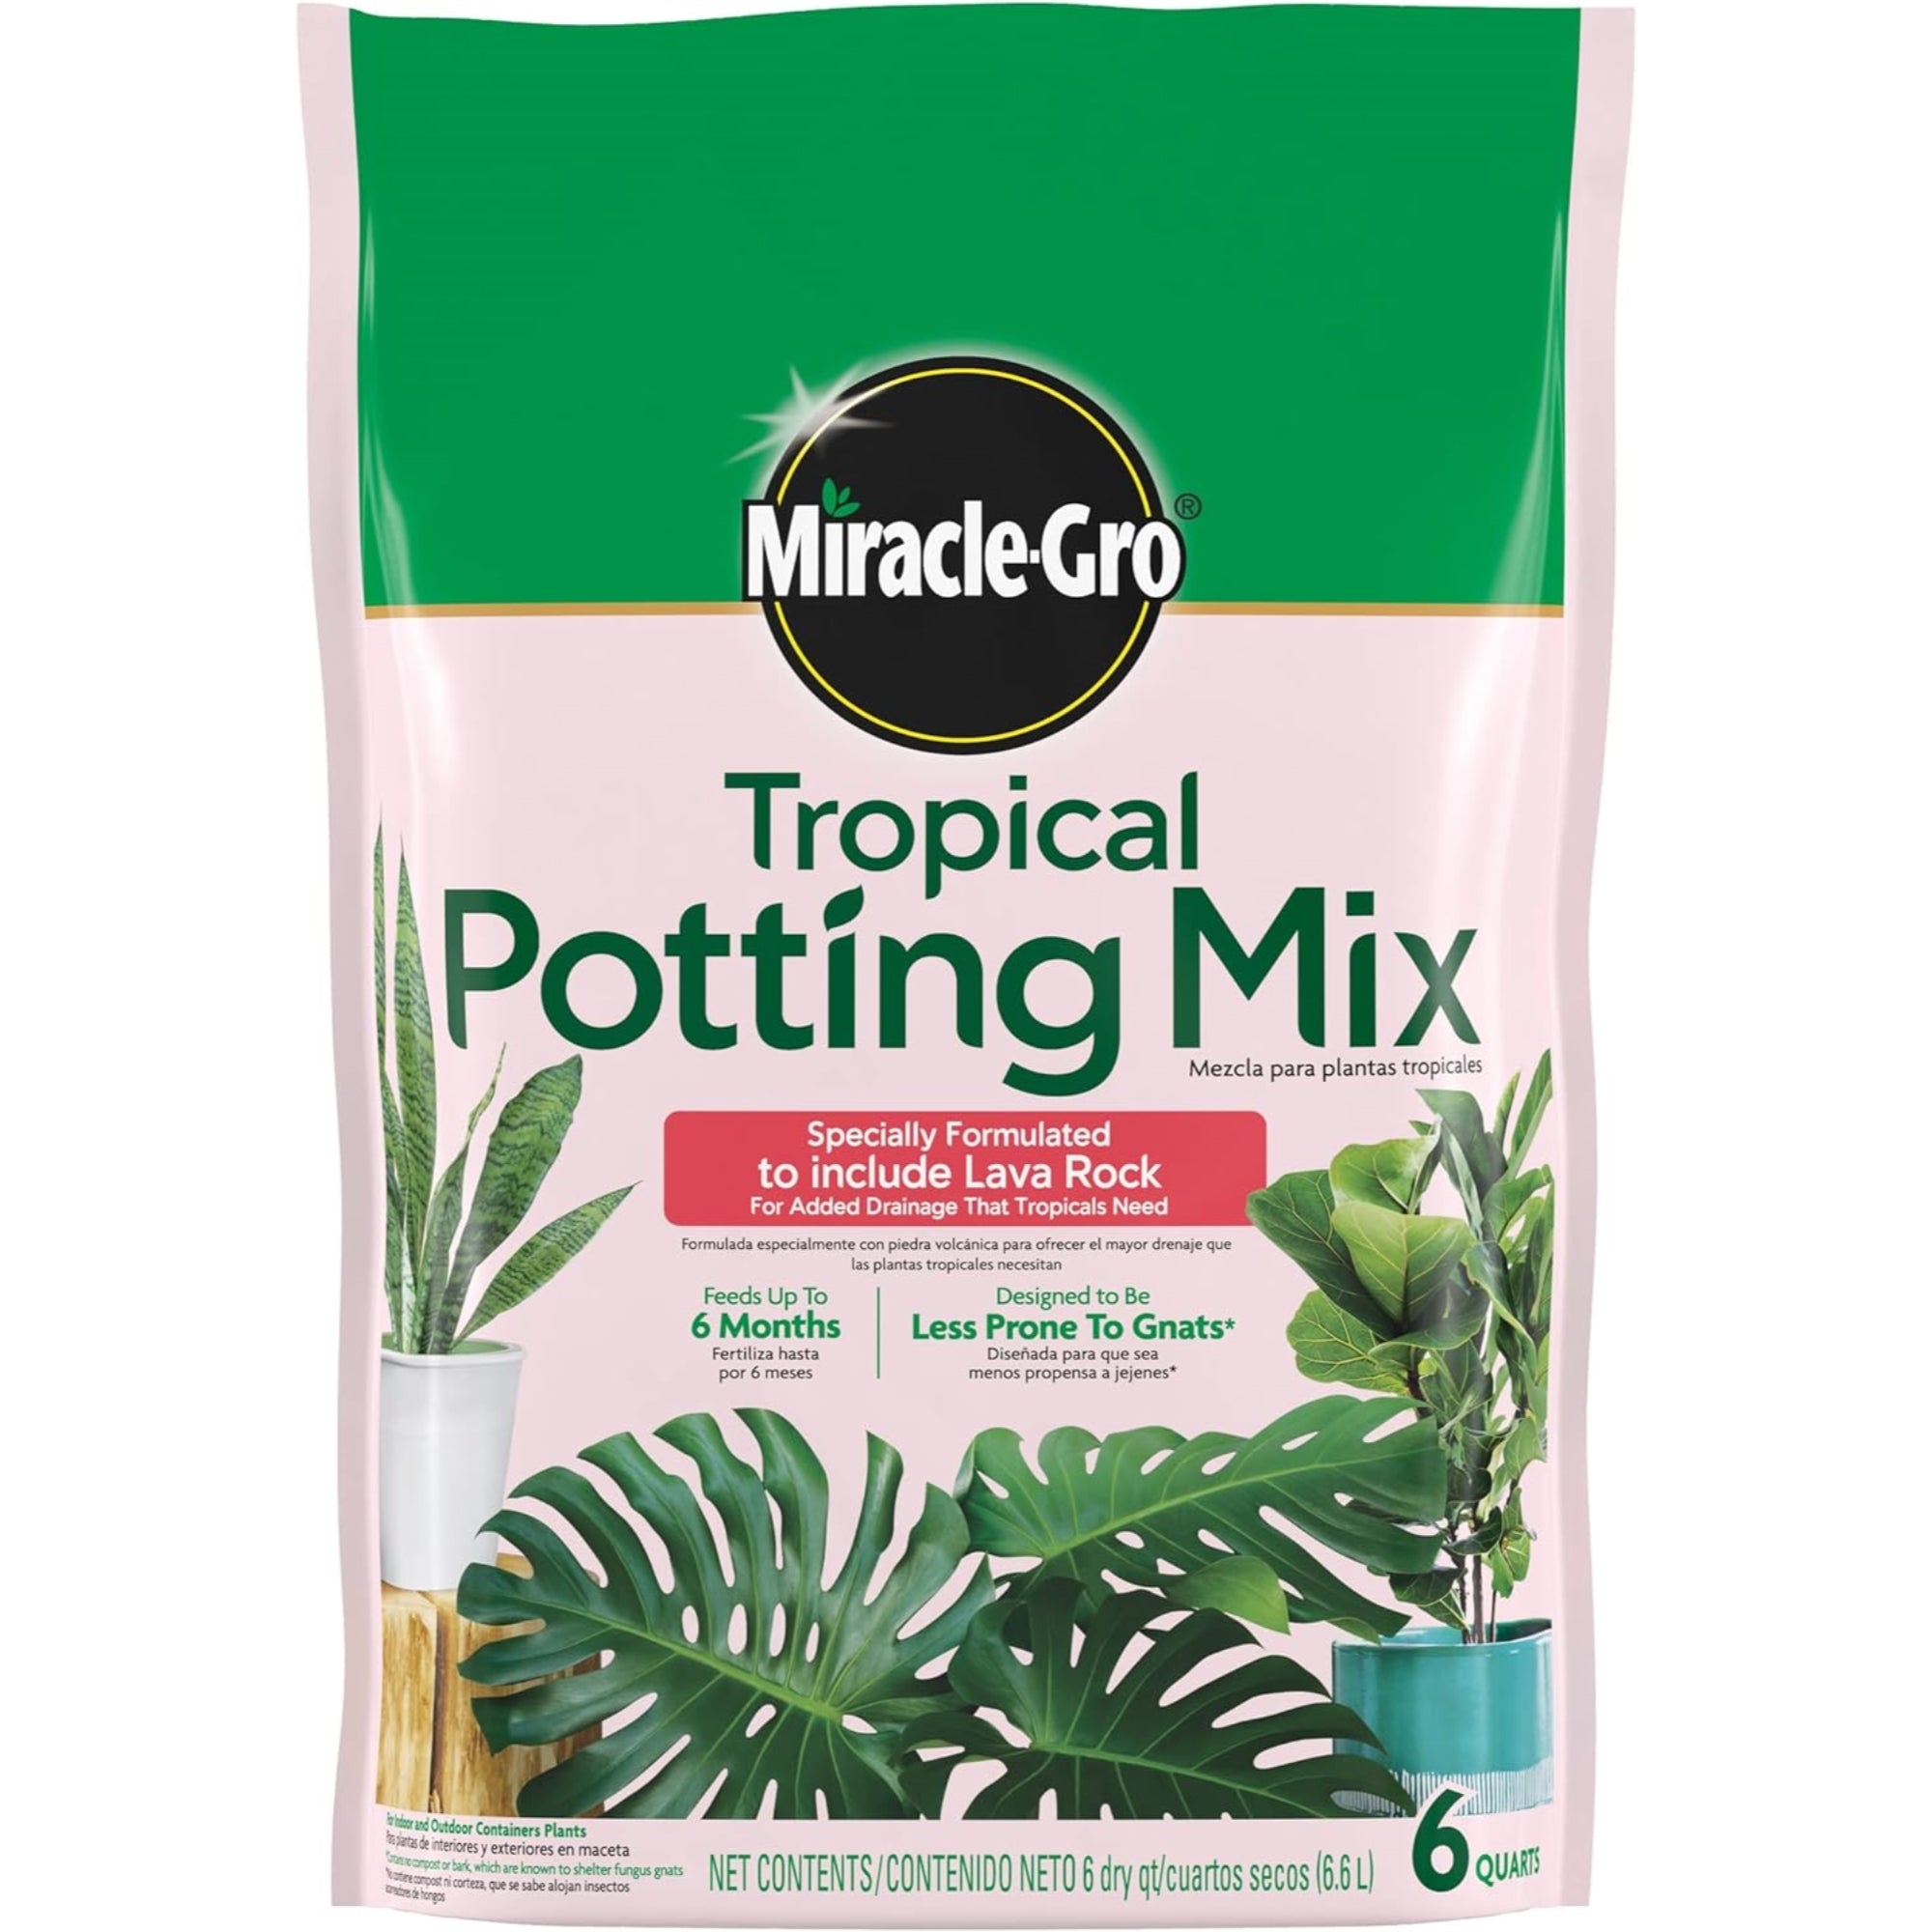 Miracle-Gro Tropical Potting Mix, Growing Media for Indoor/Outdoor Plants, 6 Quarts